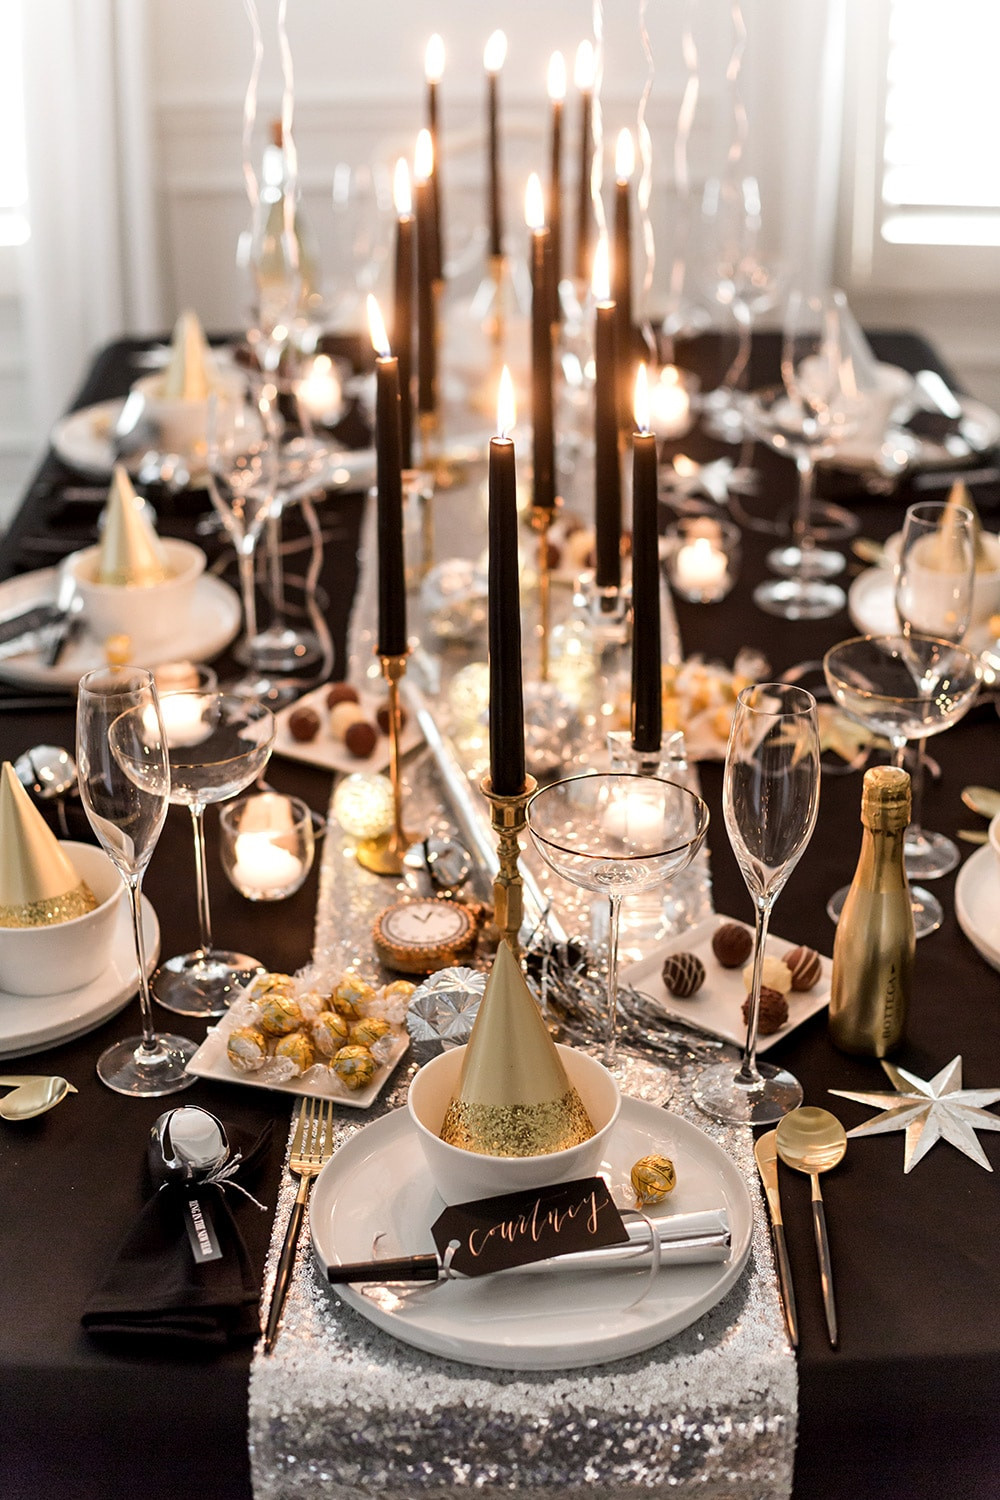 Best New Years Eve Dinners
 How to Host a New Year s Eve Dinner Party